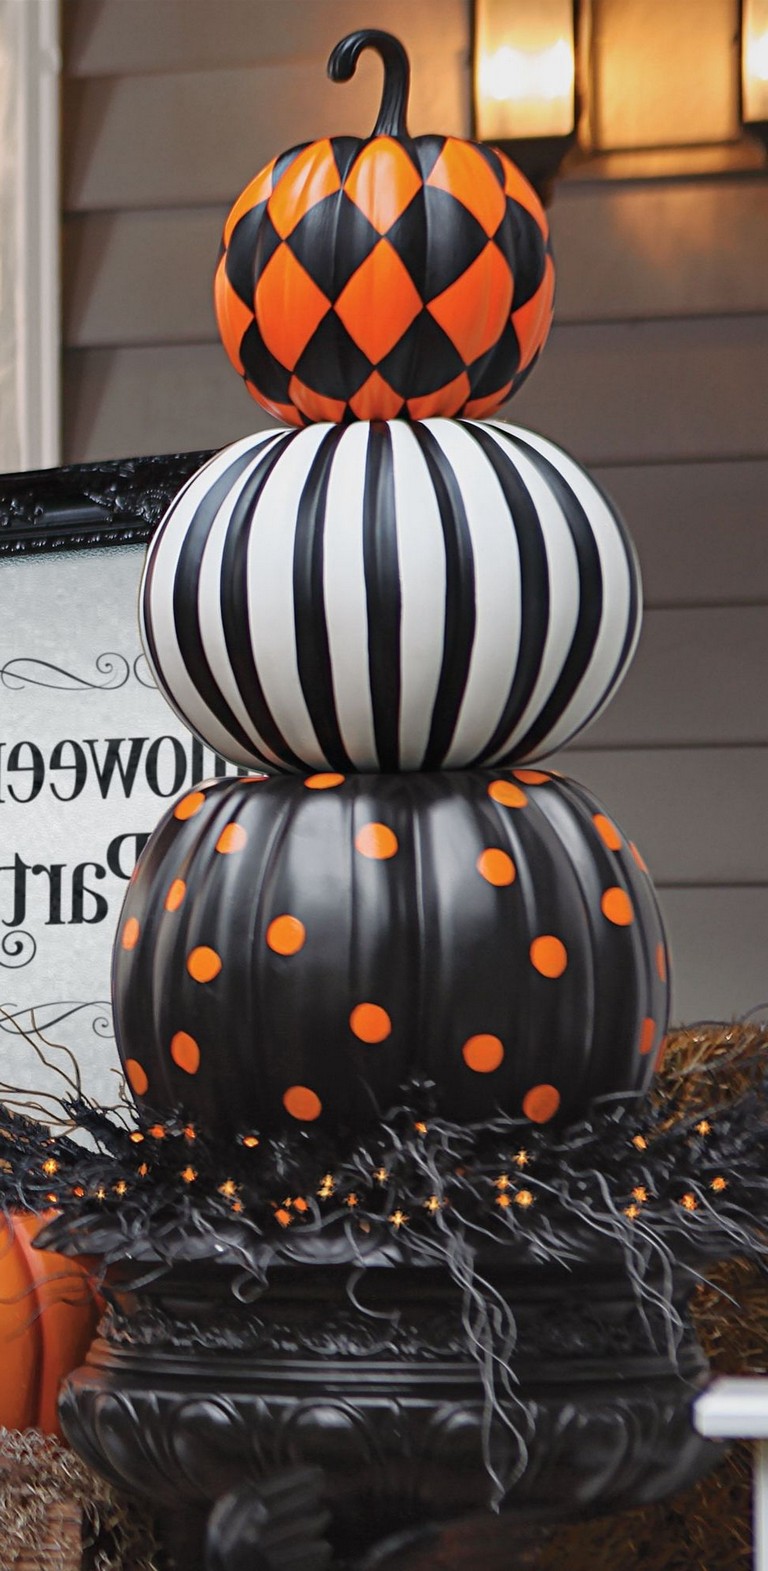 25+ Inspiring Halloween Porch Decorations Ideas - Page 17 of 28